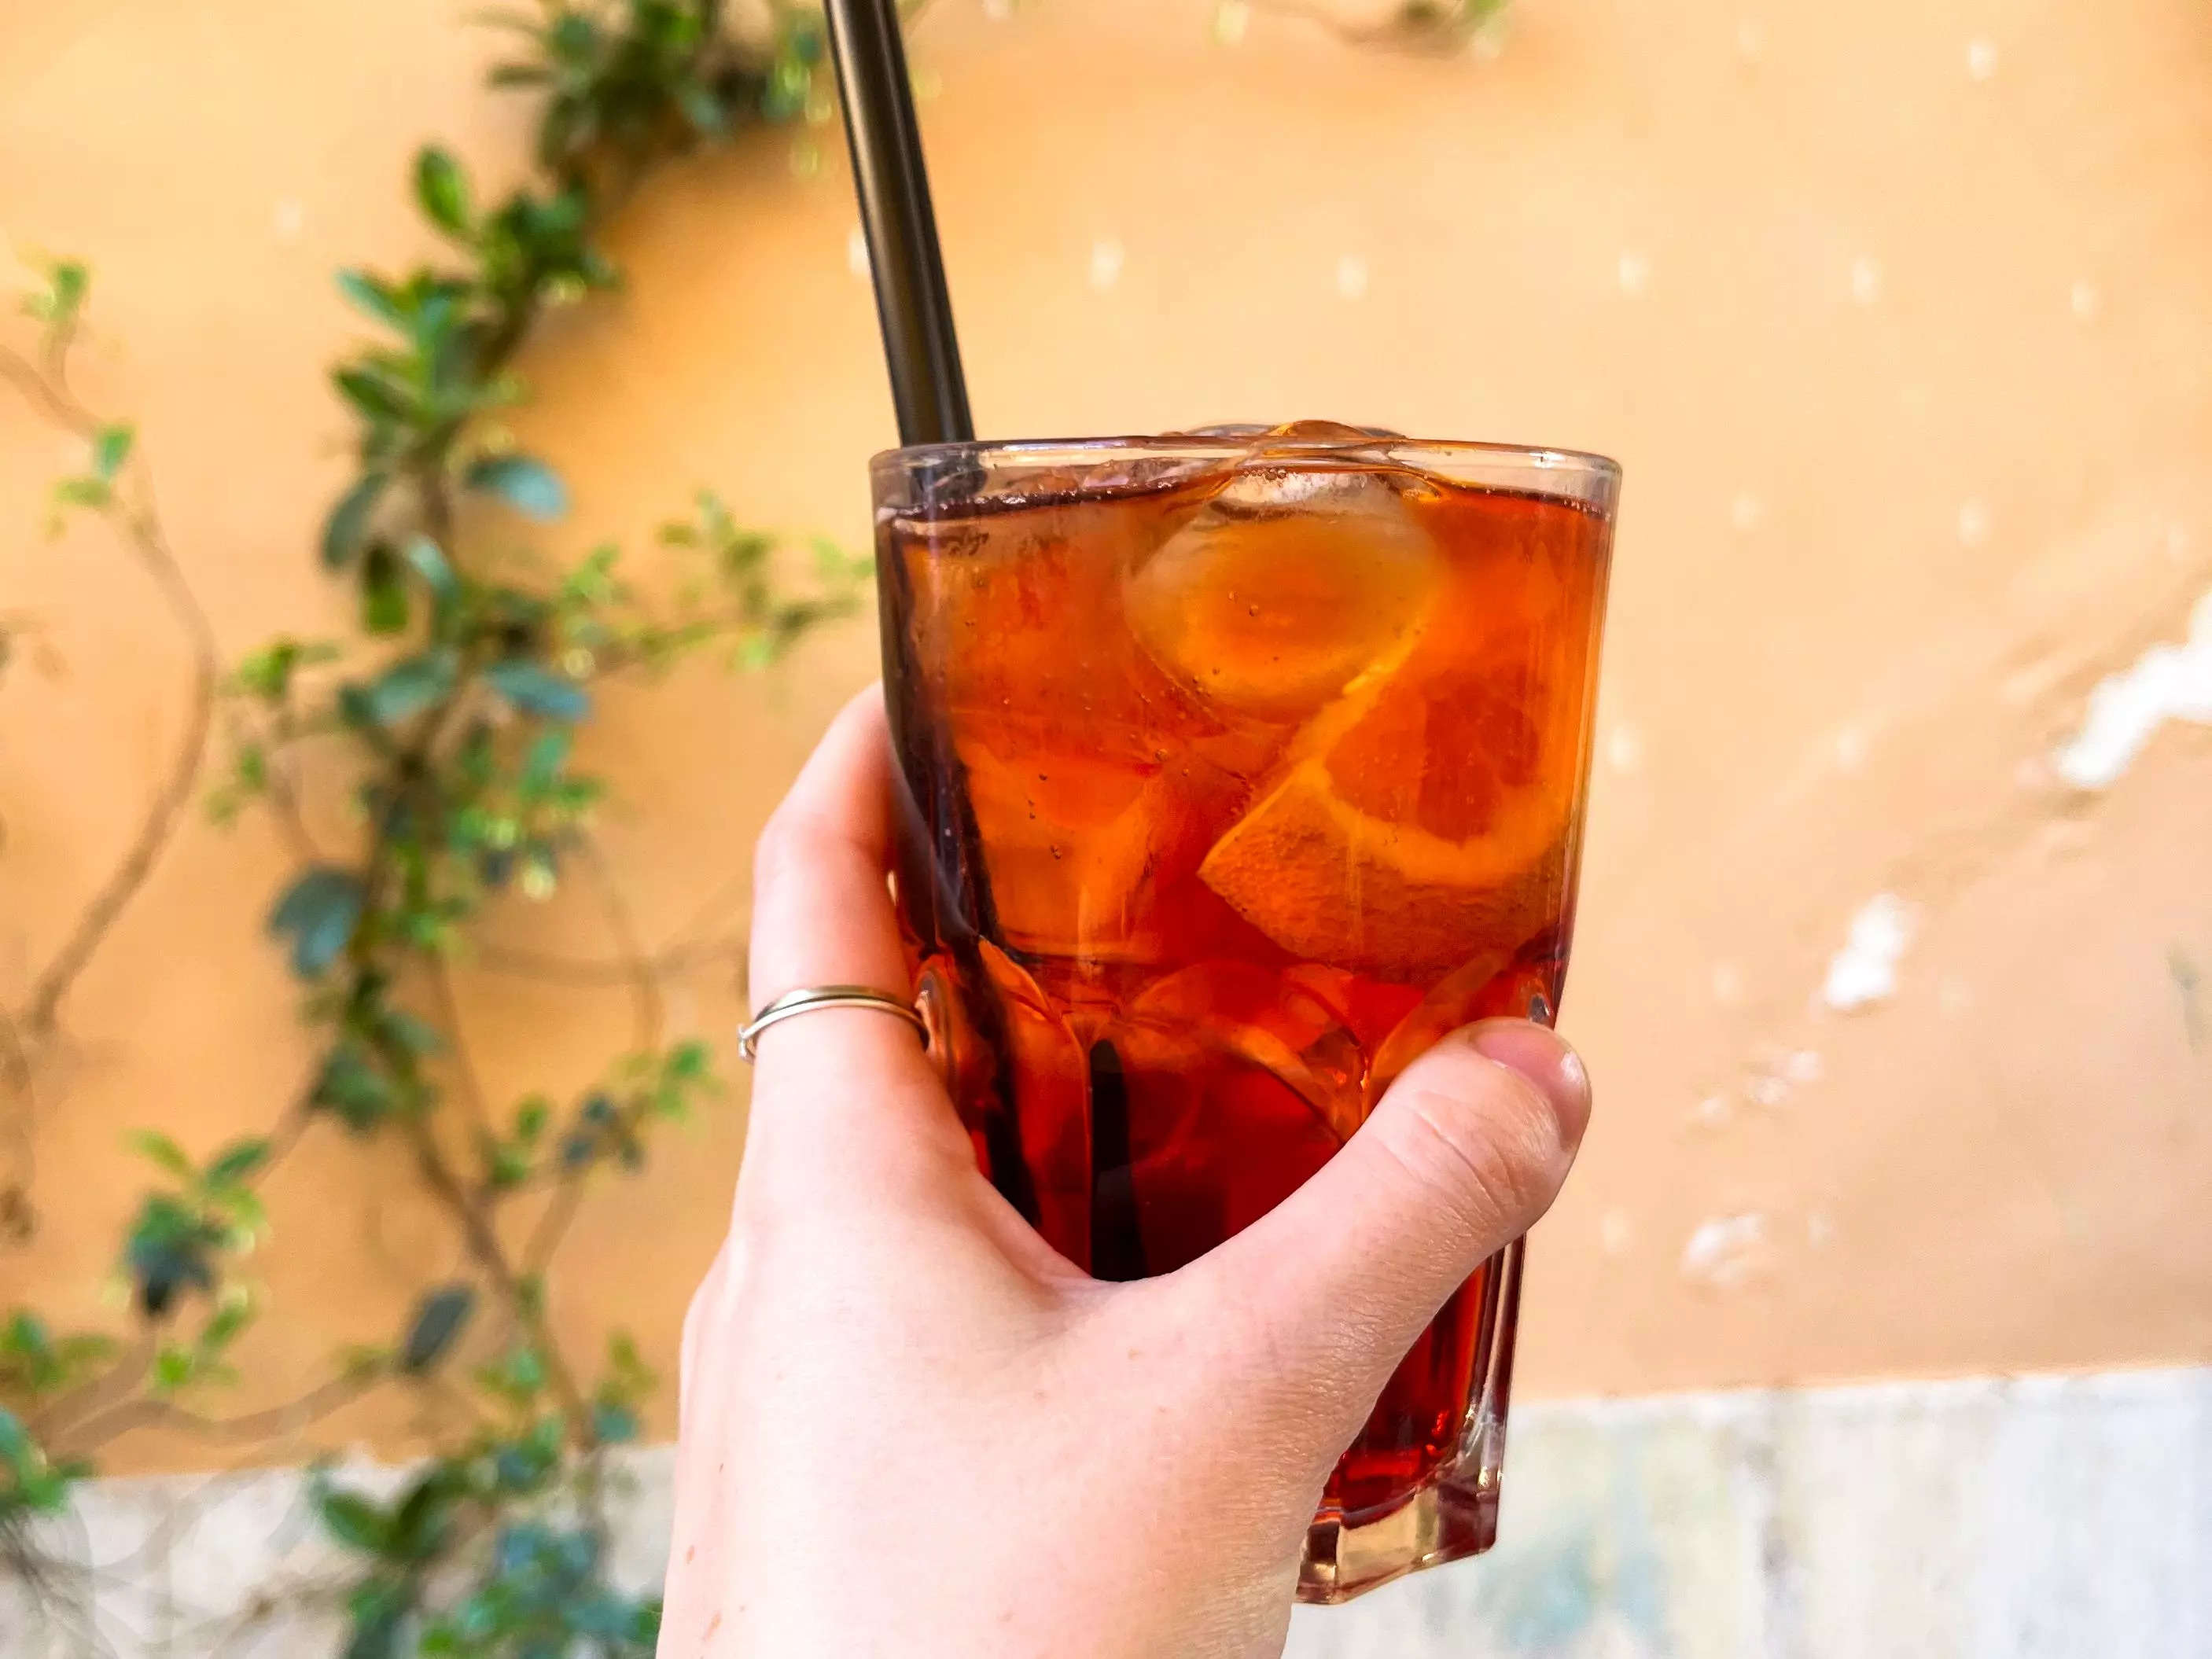 The author holds a Negroni Sbagliato cocktail in front of a wall with vines.